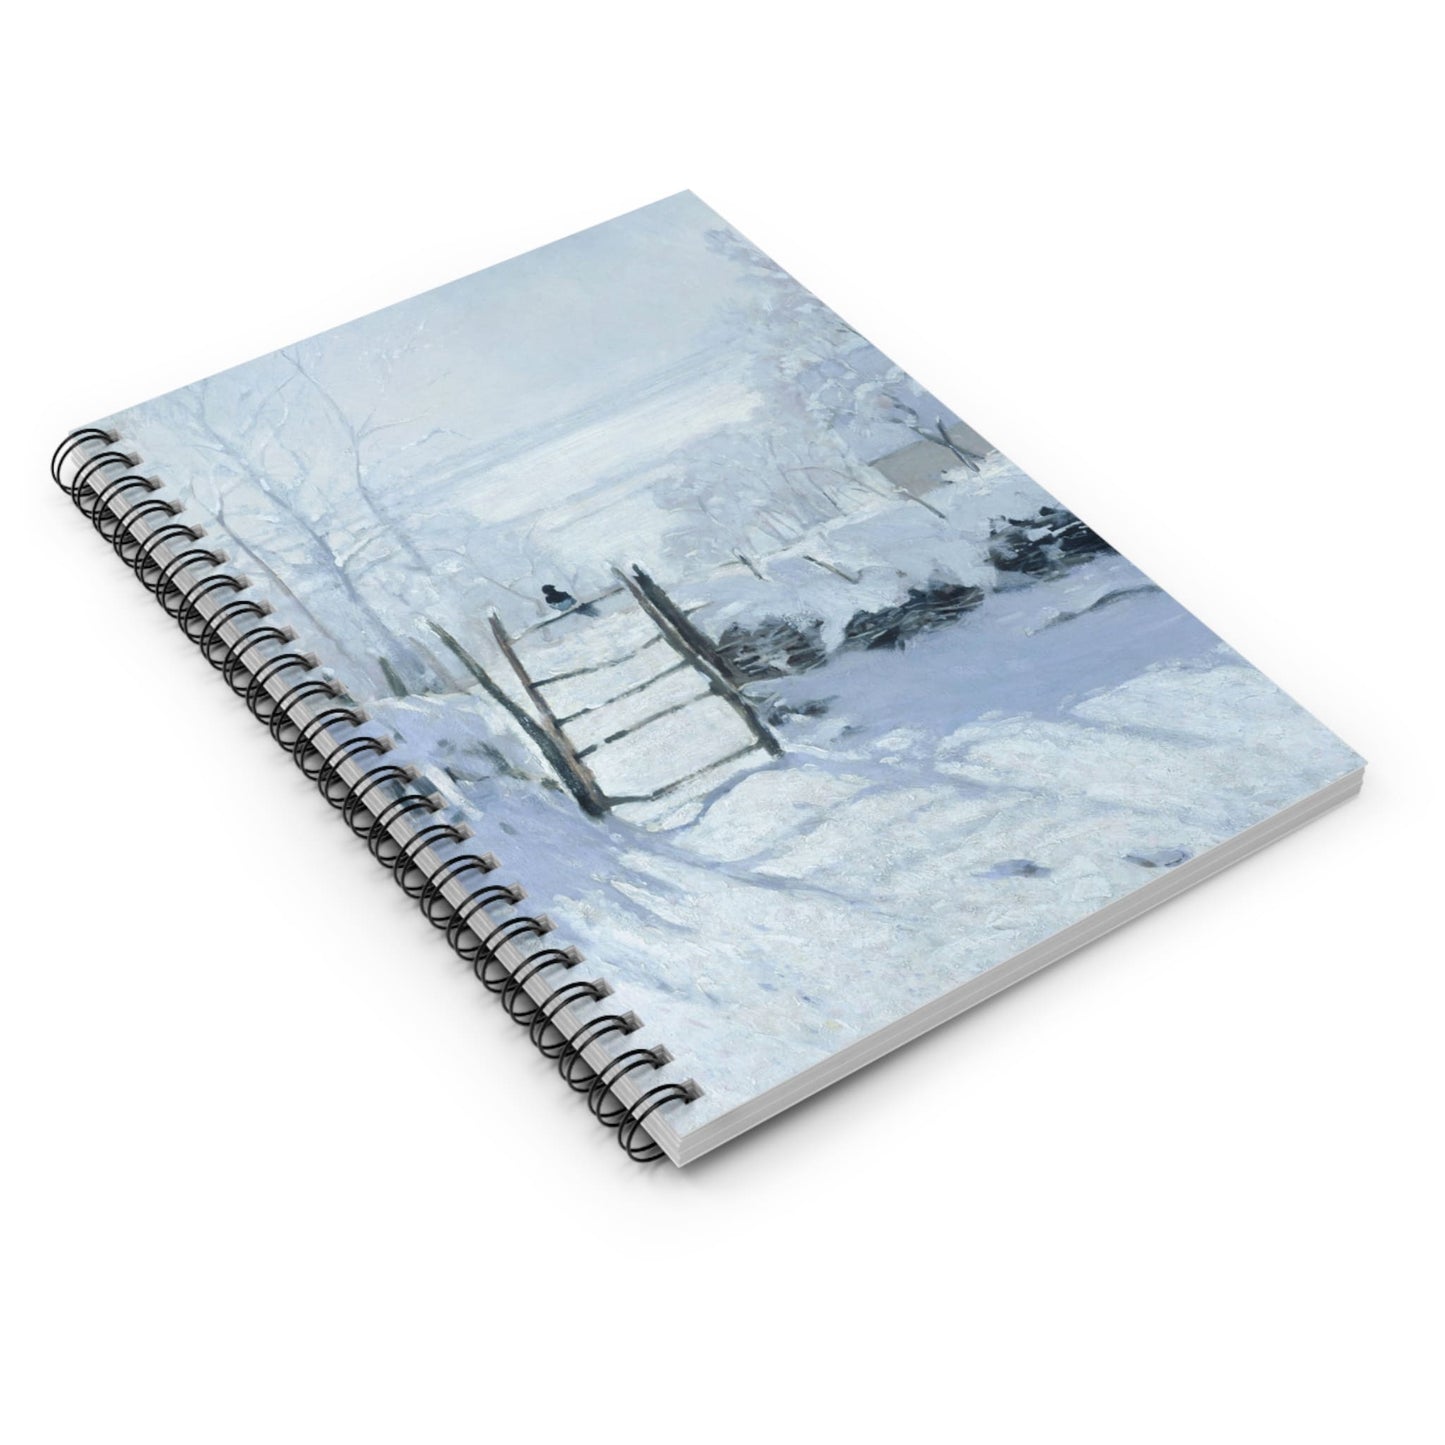 Winter Spiral Notebook Laying Flat on White Surface